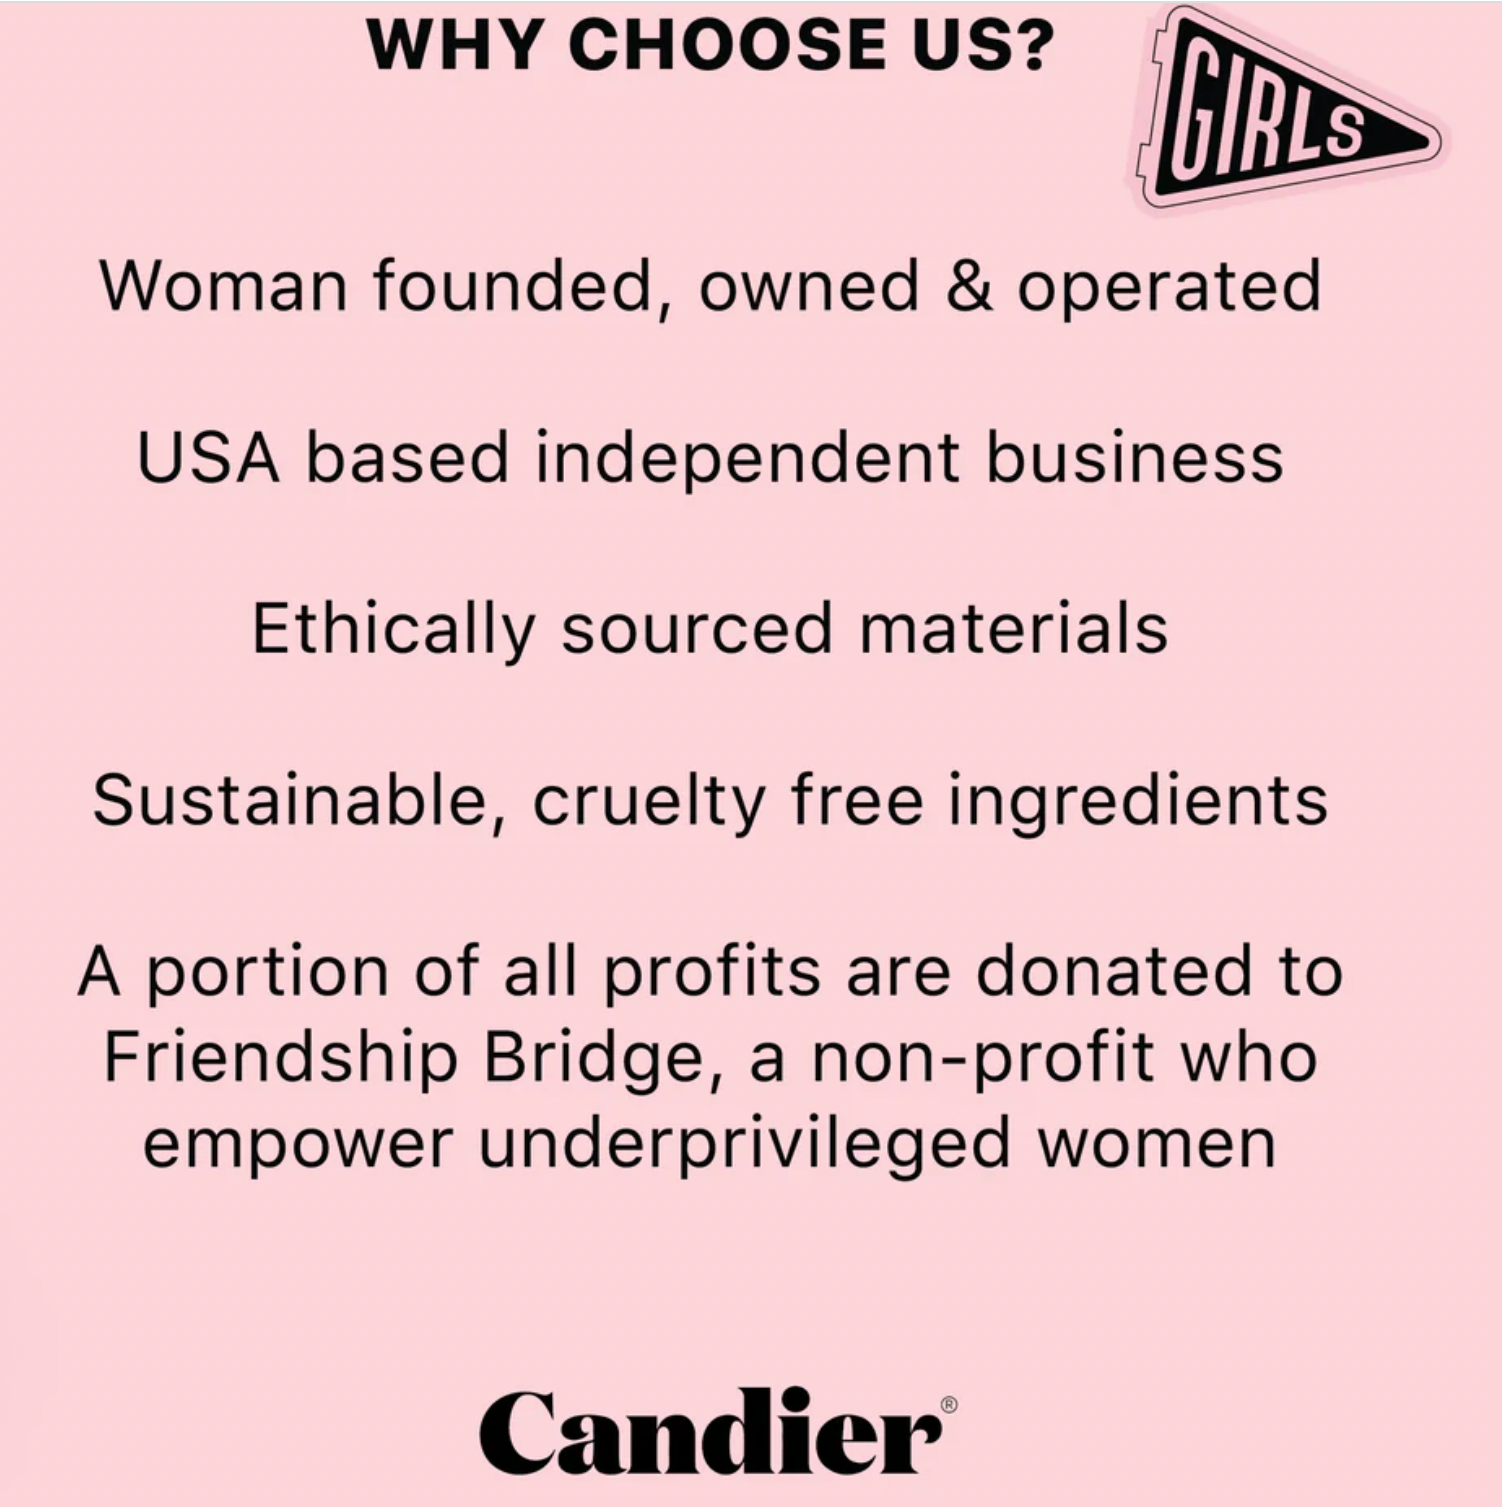 Candier SOY CANDLE "You're doing great babe"